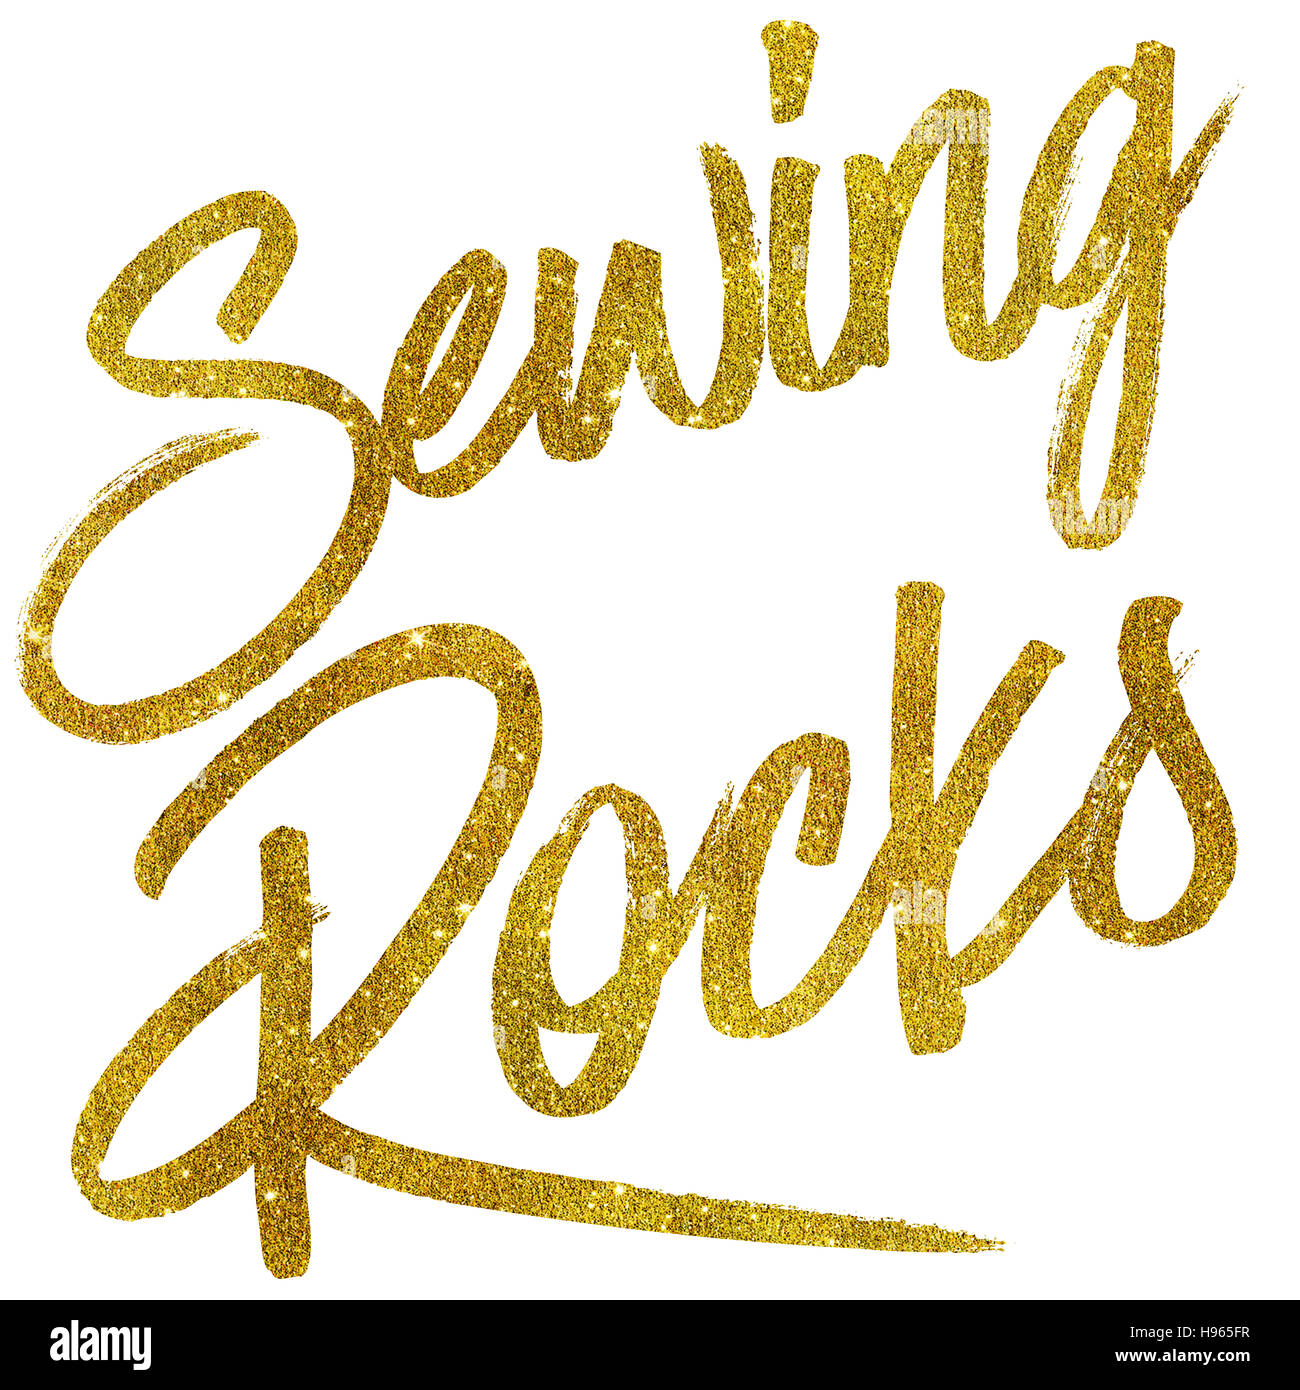 Sewing Rocks Gold Faux Foil Metallic Glitter Quote Isolated Stock Photo